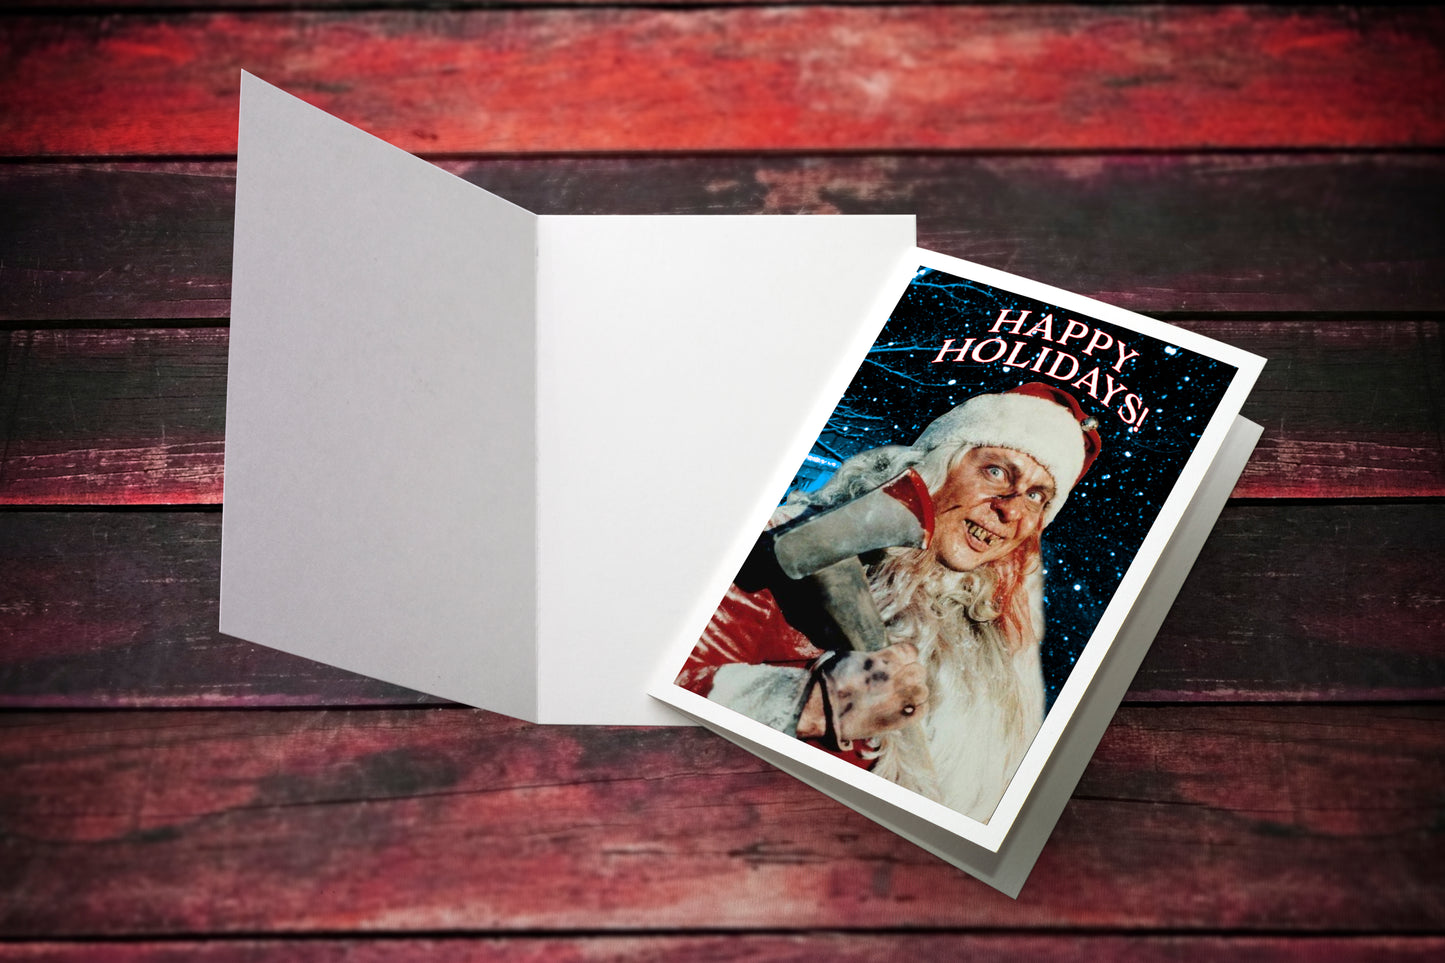 Tales From The Crypt Themed Holiday Card